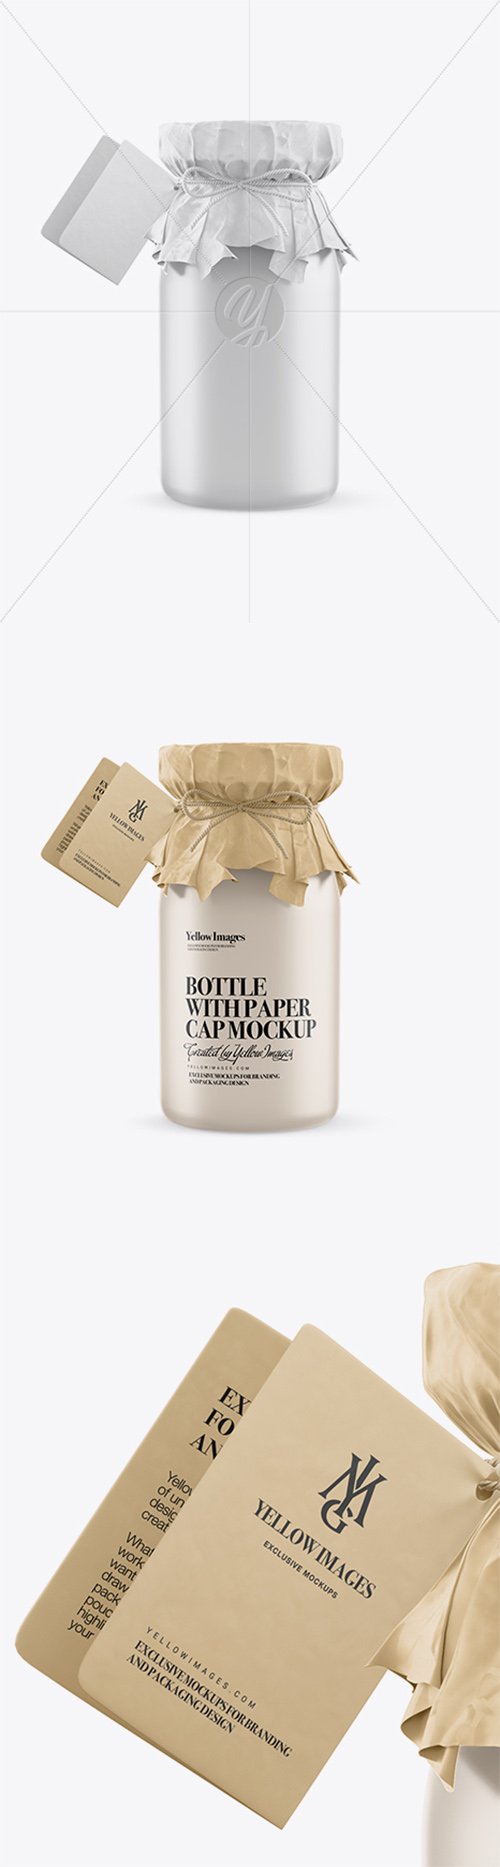 Matte Bottle with Paper Cap and Tag Mockup 23506 TIF